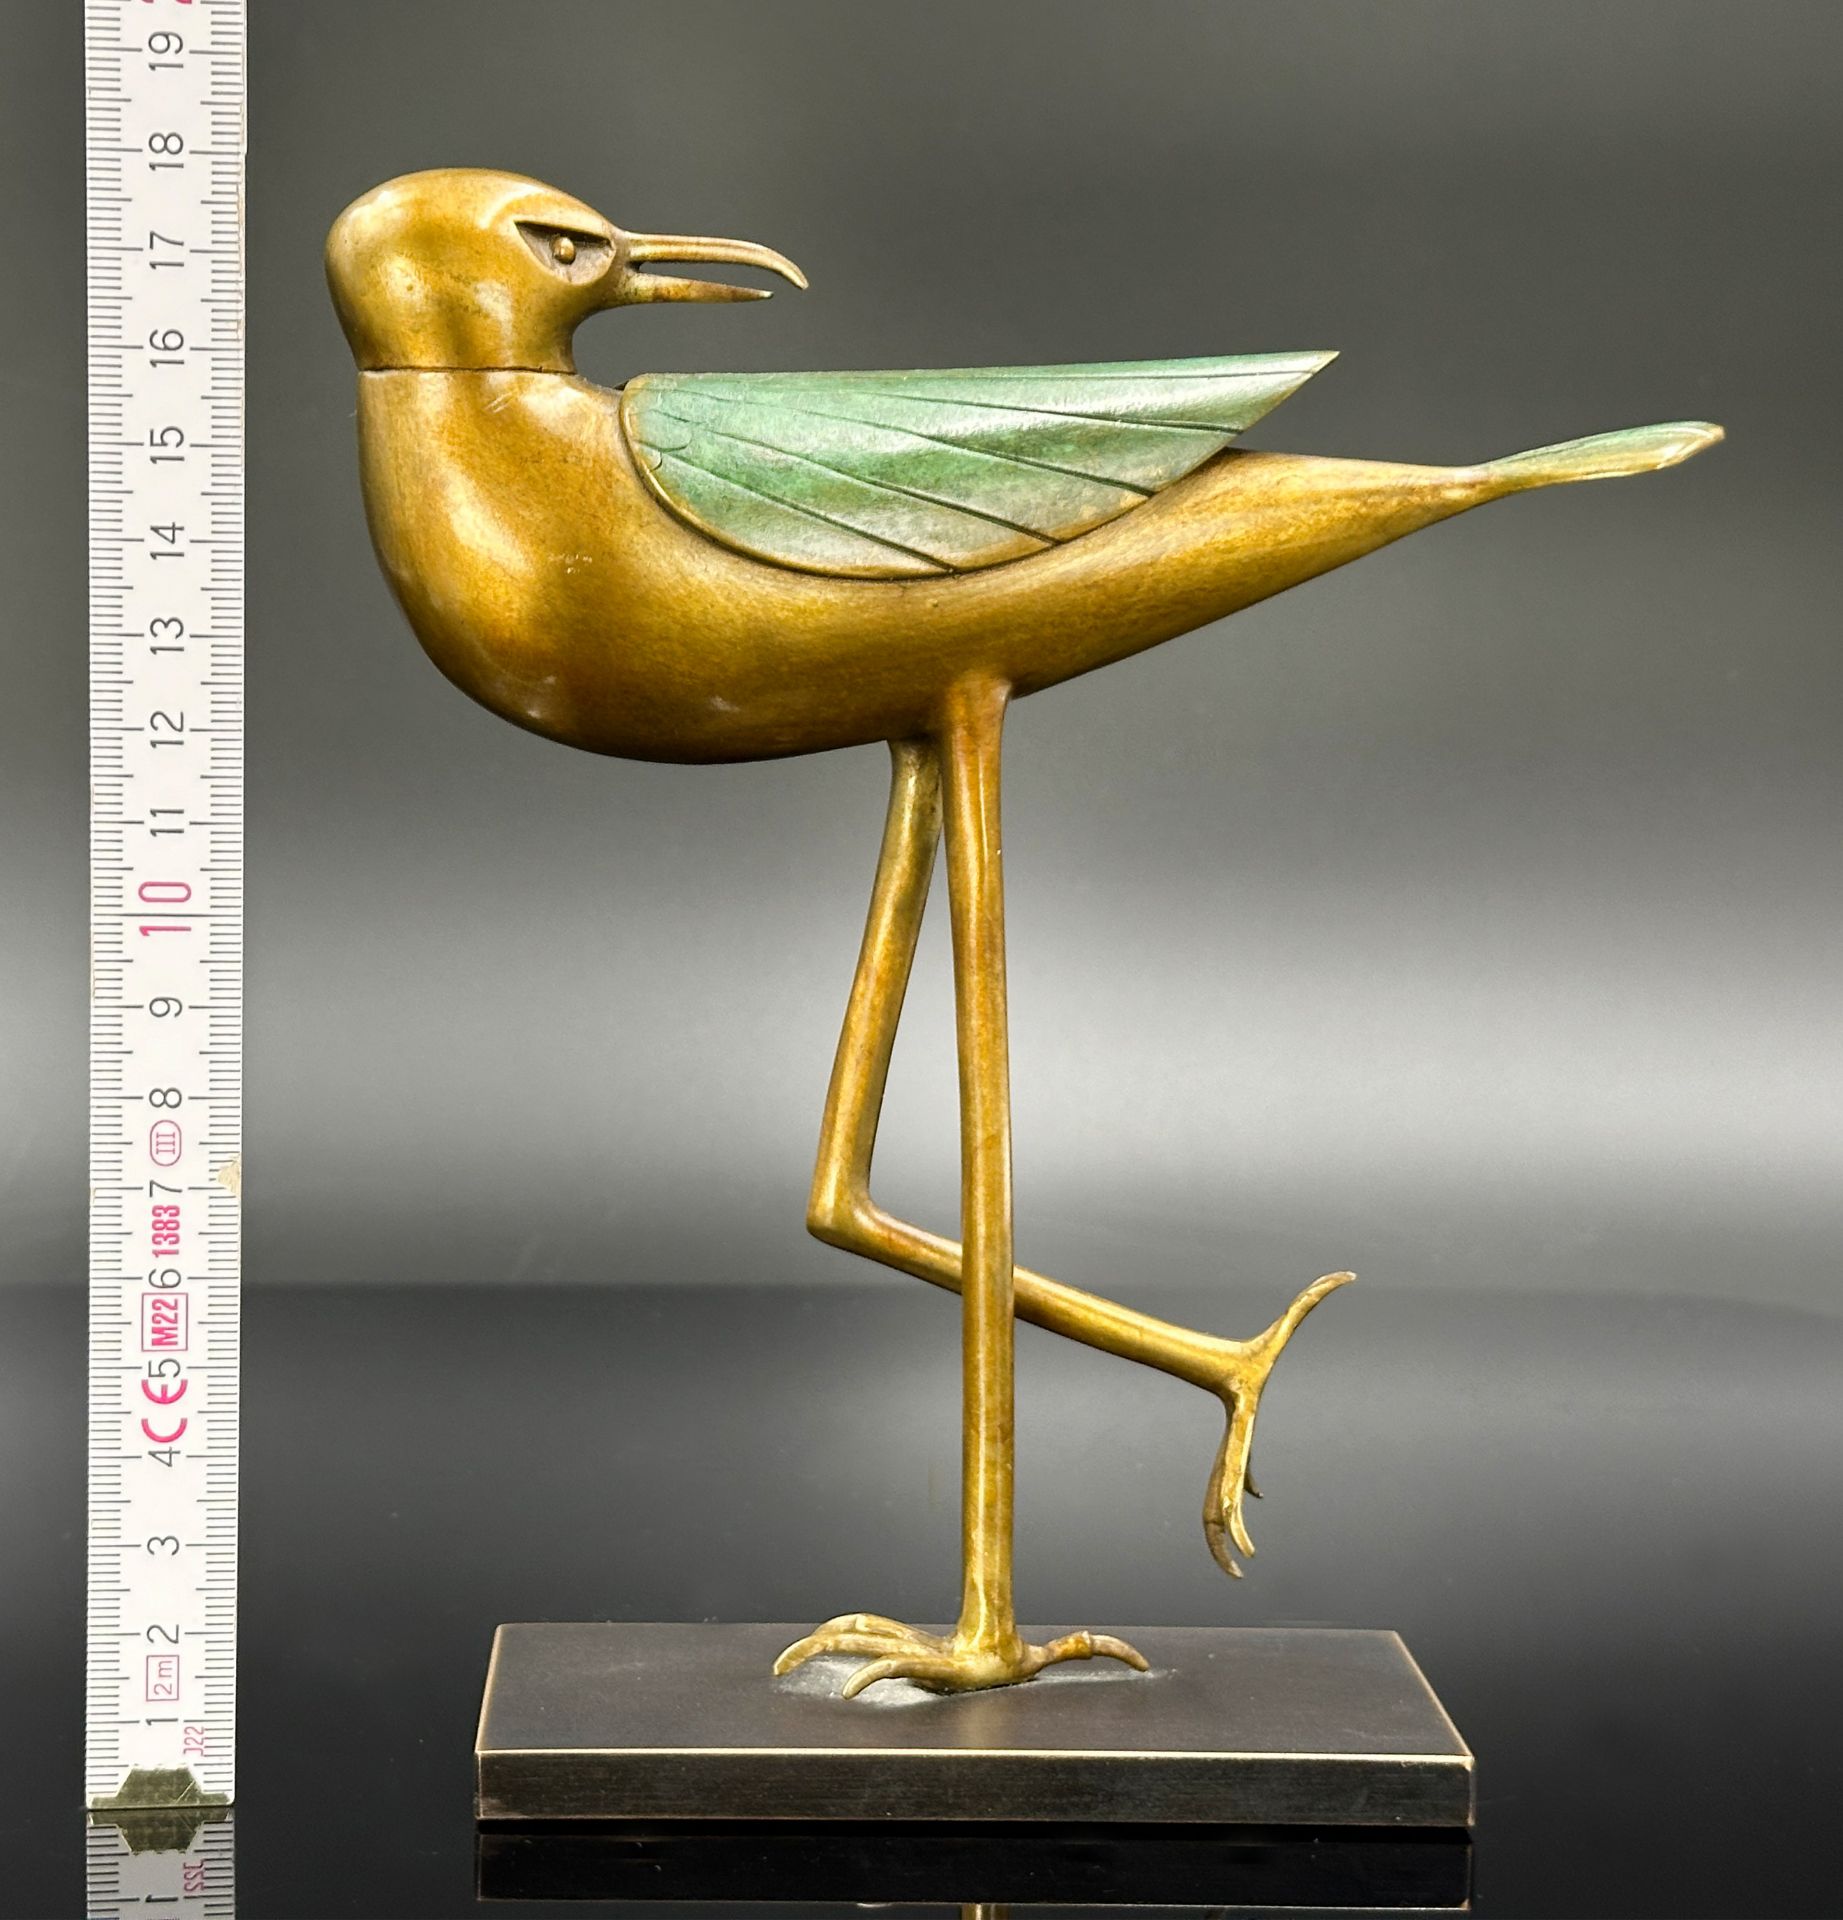 Paul WUNDERLICH (1927 - 2010). Bronze. "Seagull". 2008. - Image 8 of 8